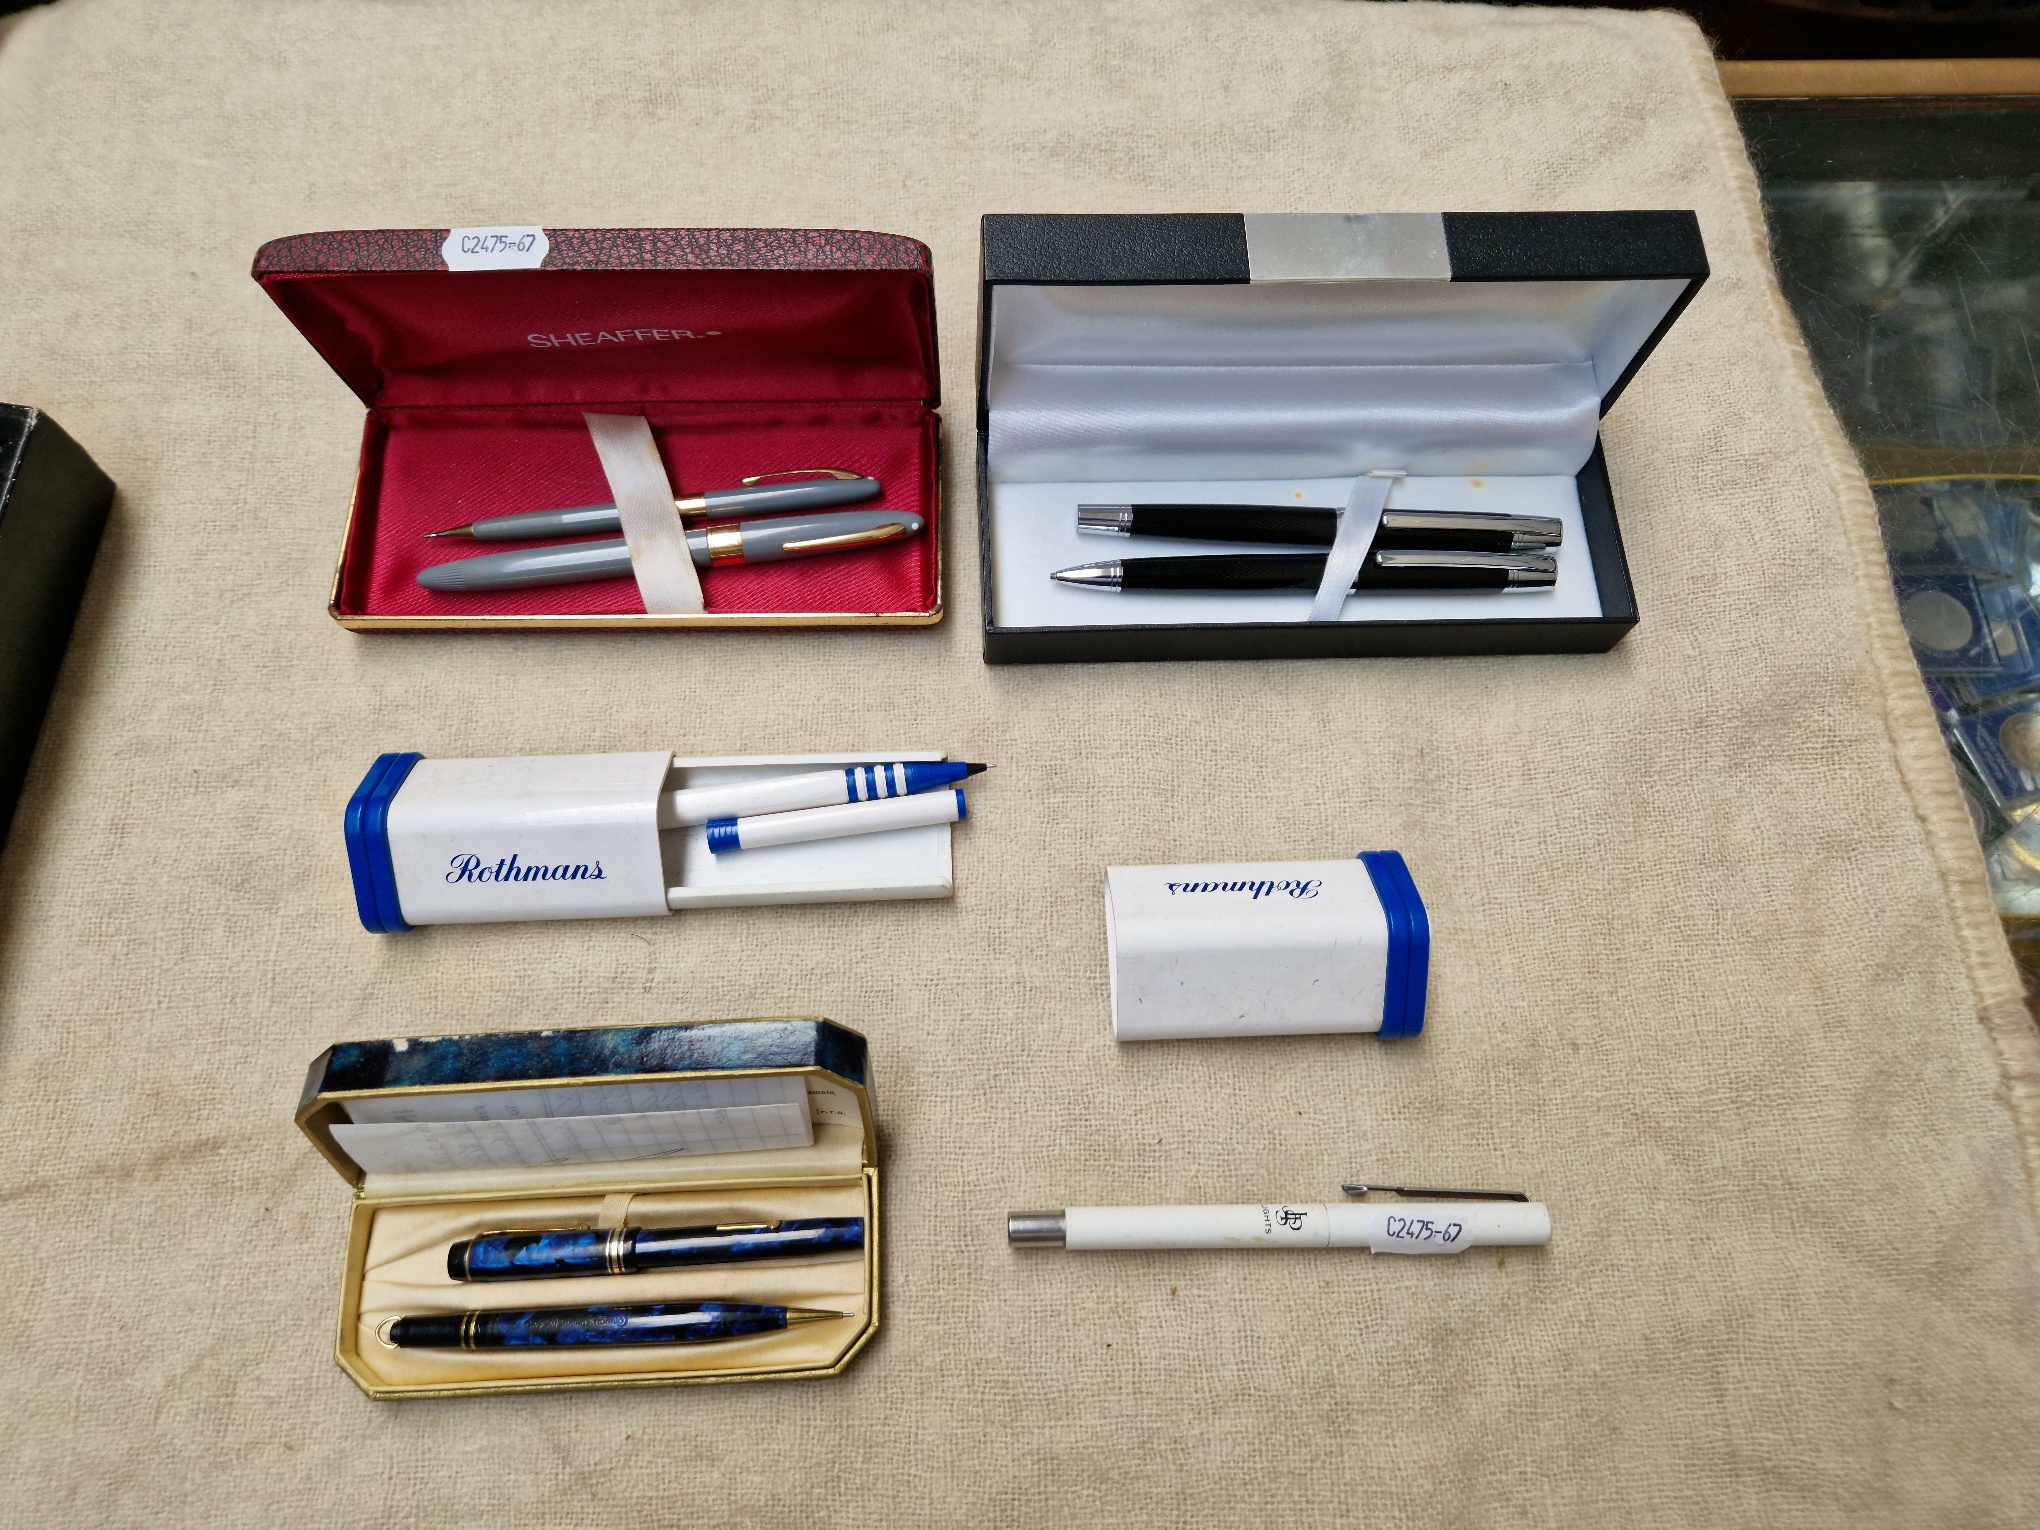 A collection of Pens including Parker, Sheaffer, Conway Stewart & Thierry Mugler.